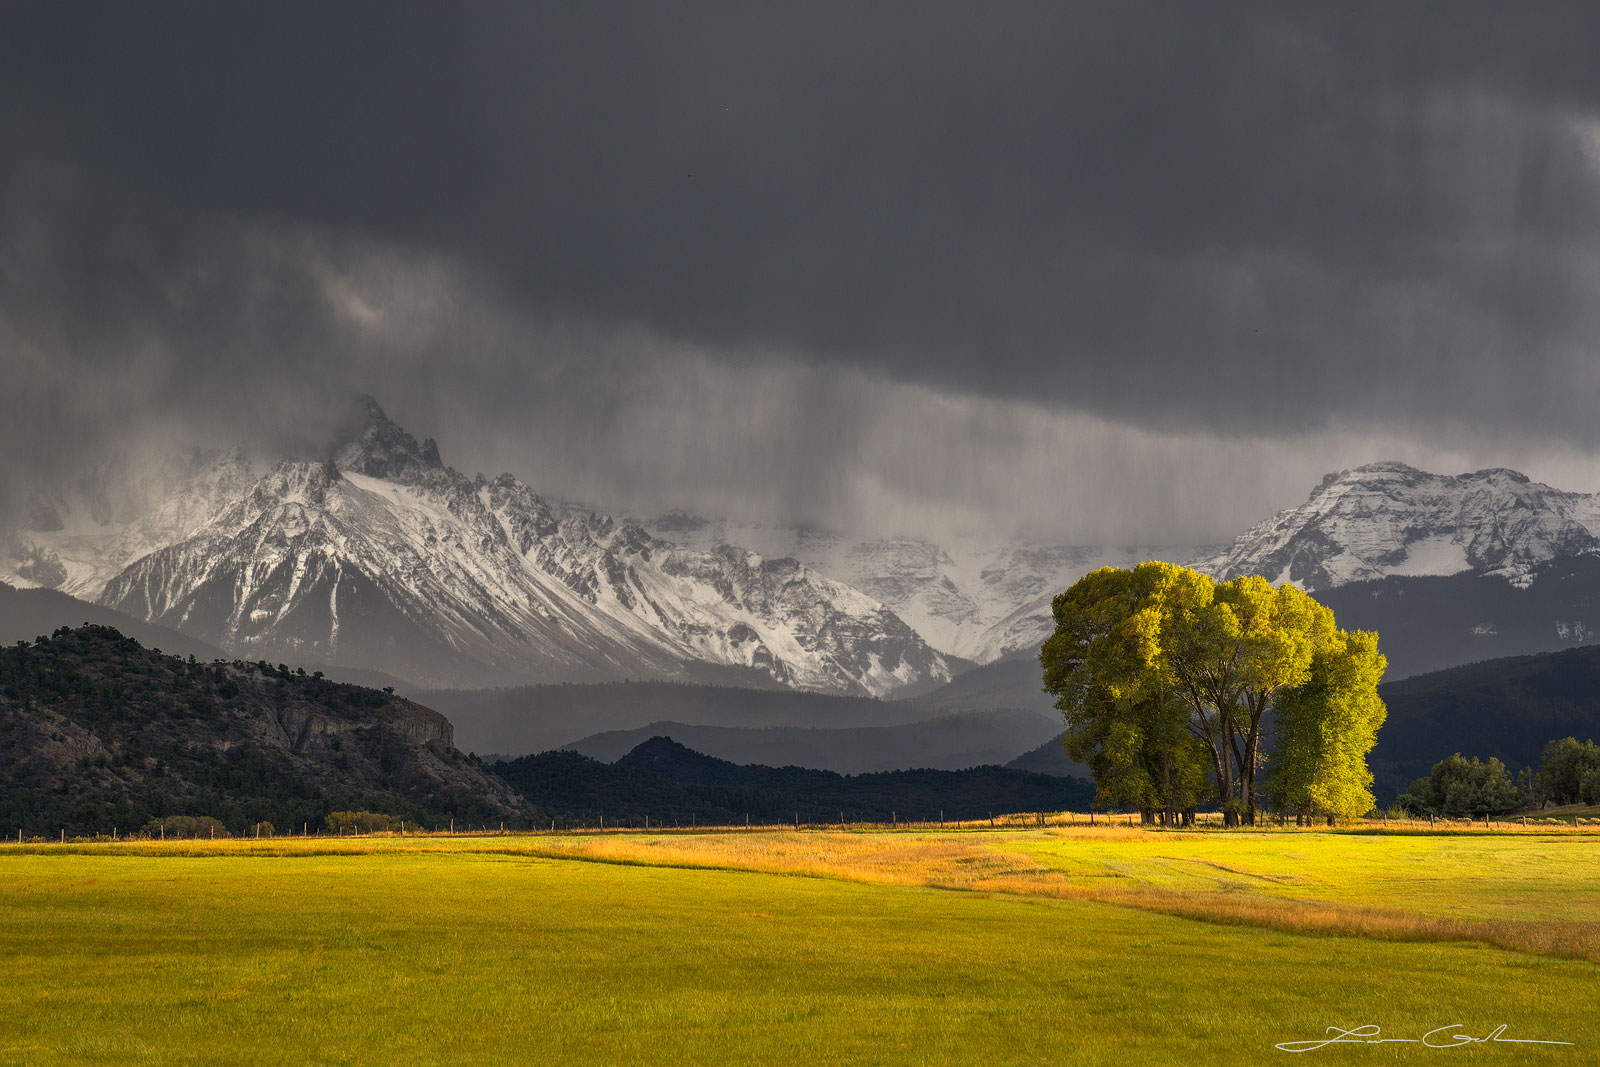 A sunlit meadow and tree with snow covered mountains and an approaching rain storm